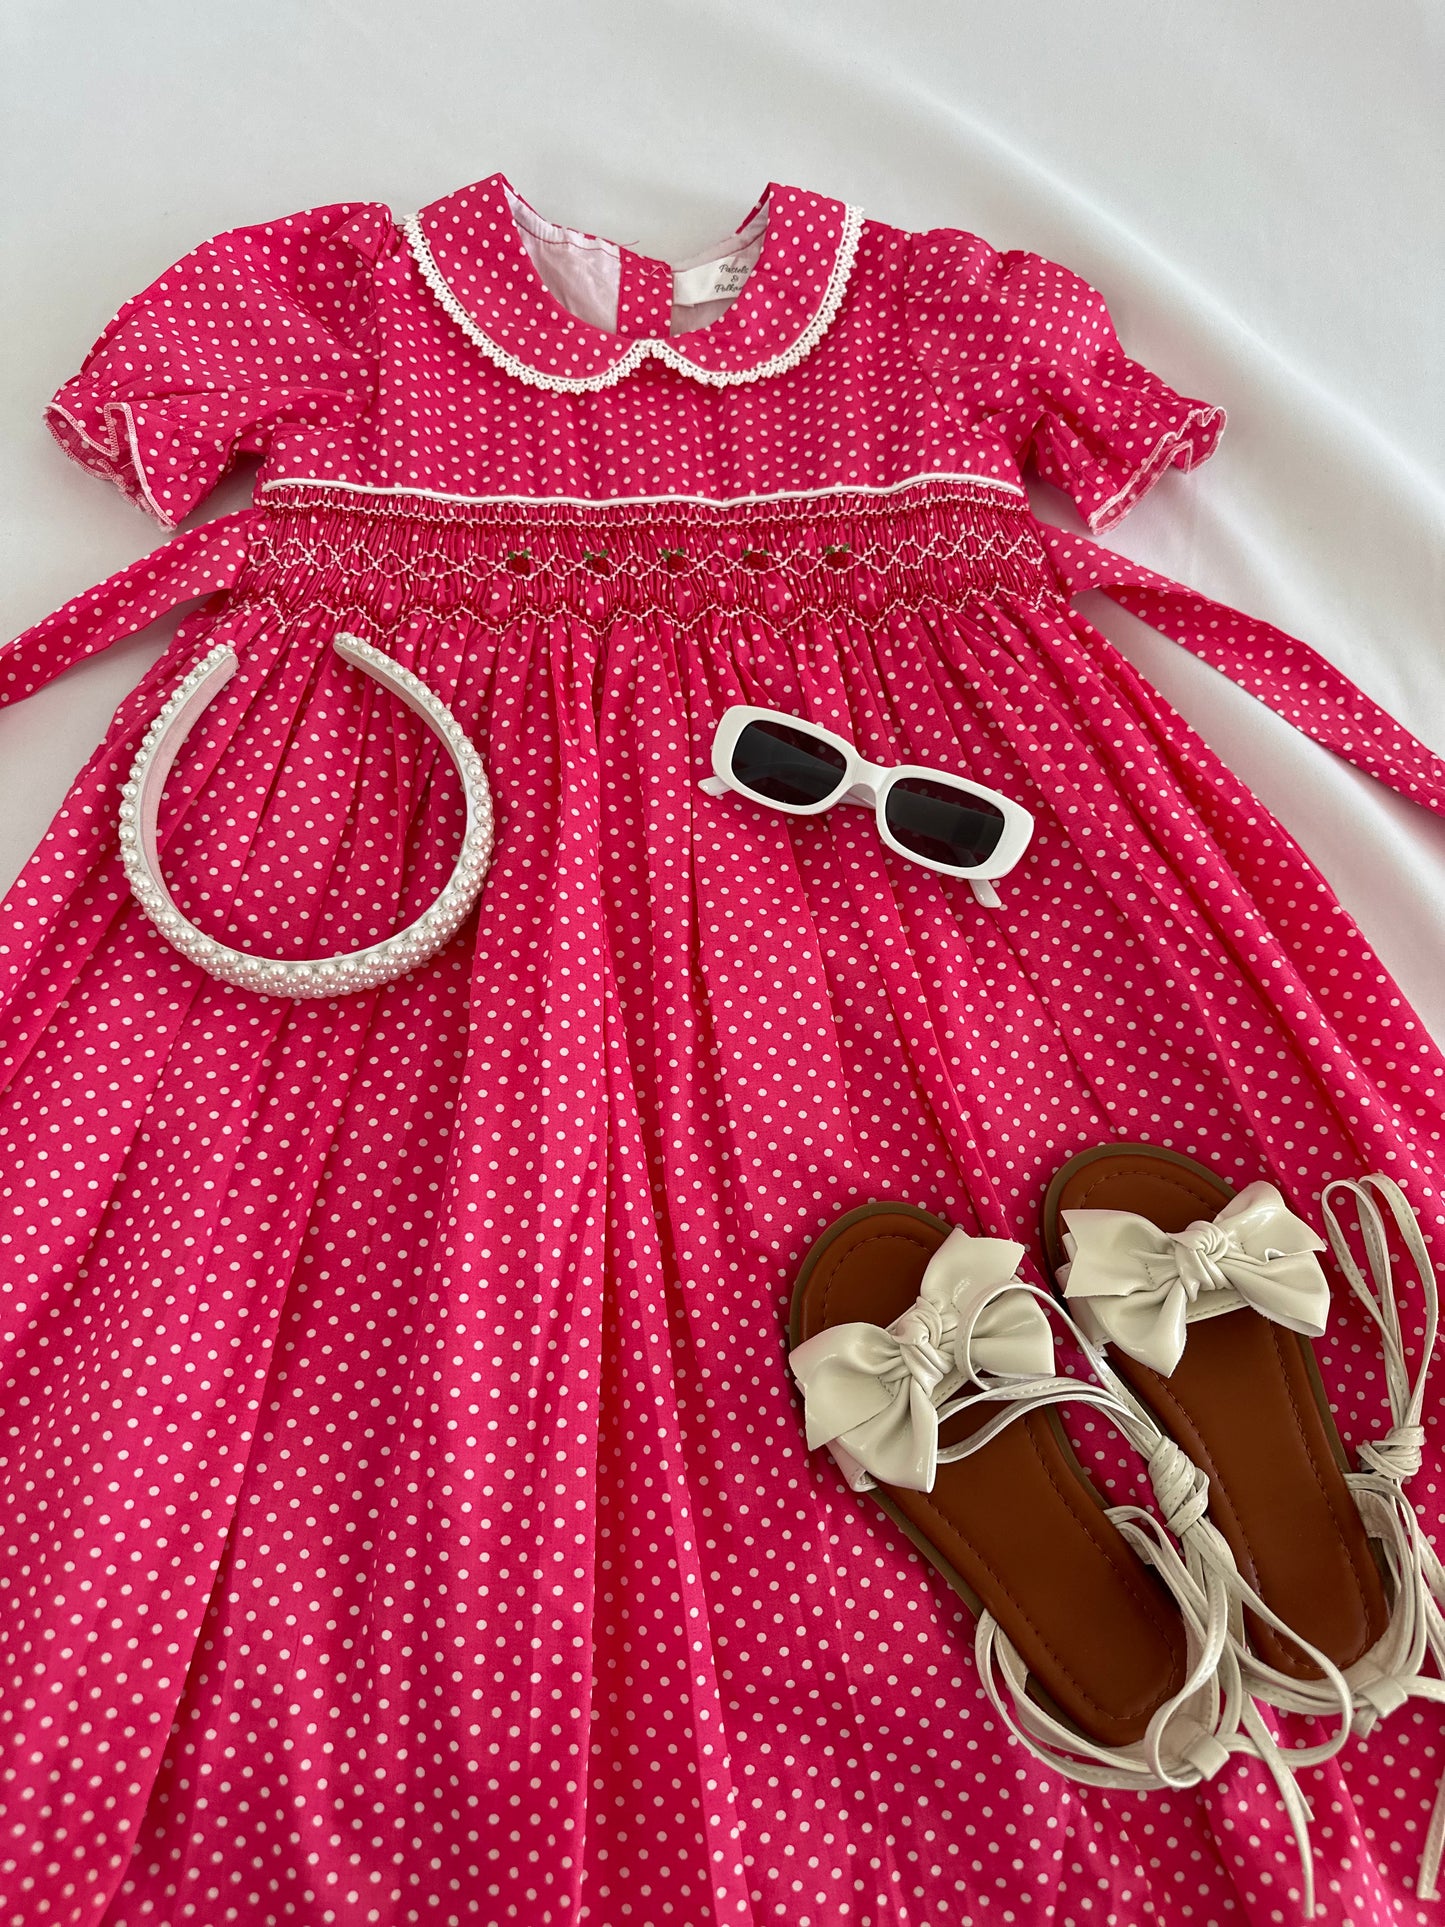 Adorable smocked polkadots dress with hand embroidered flower details